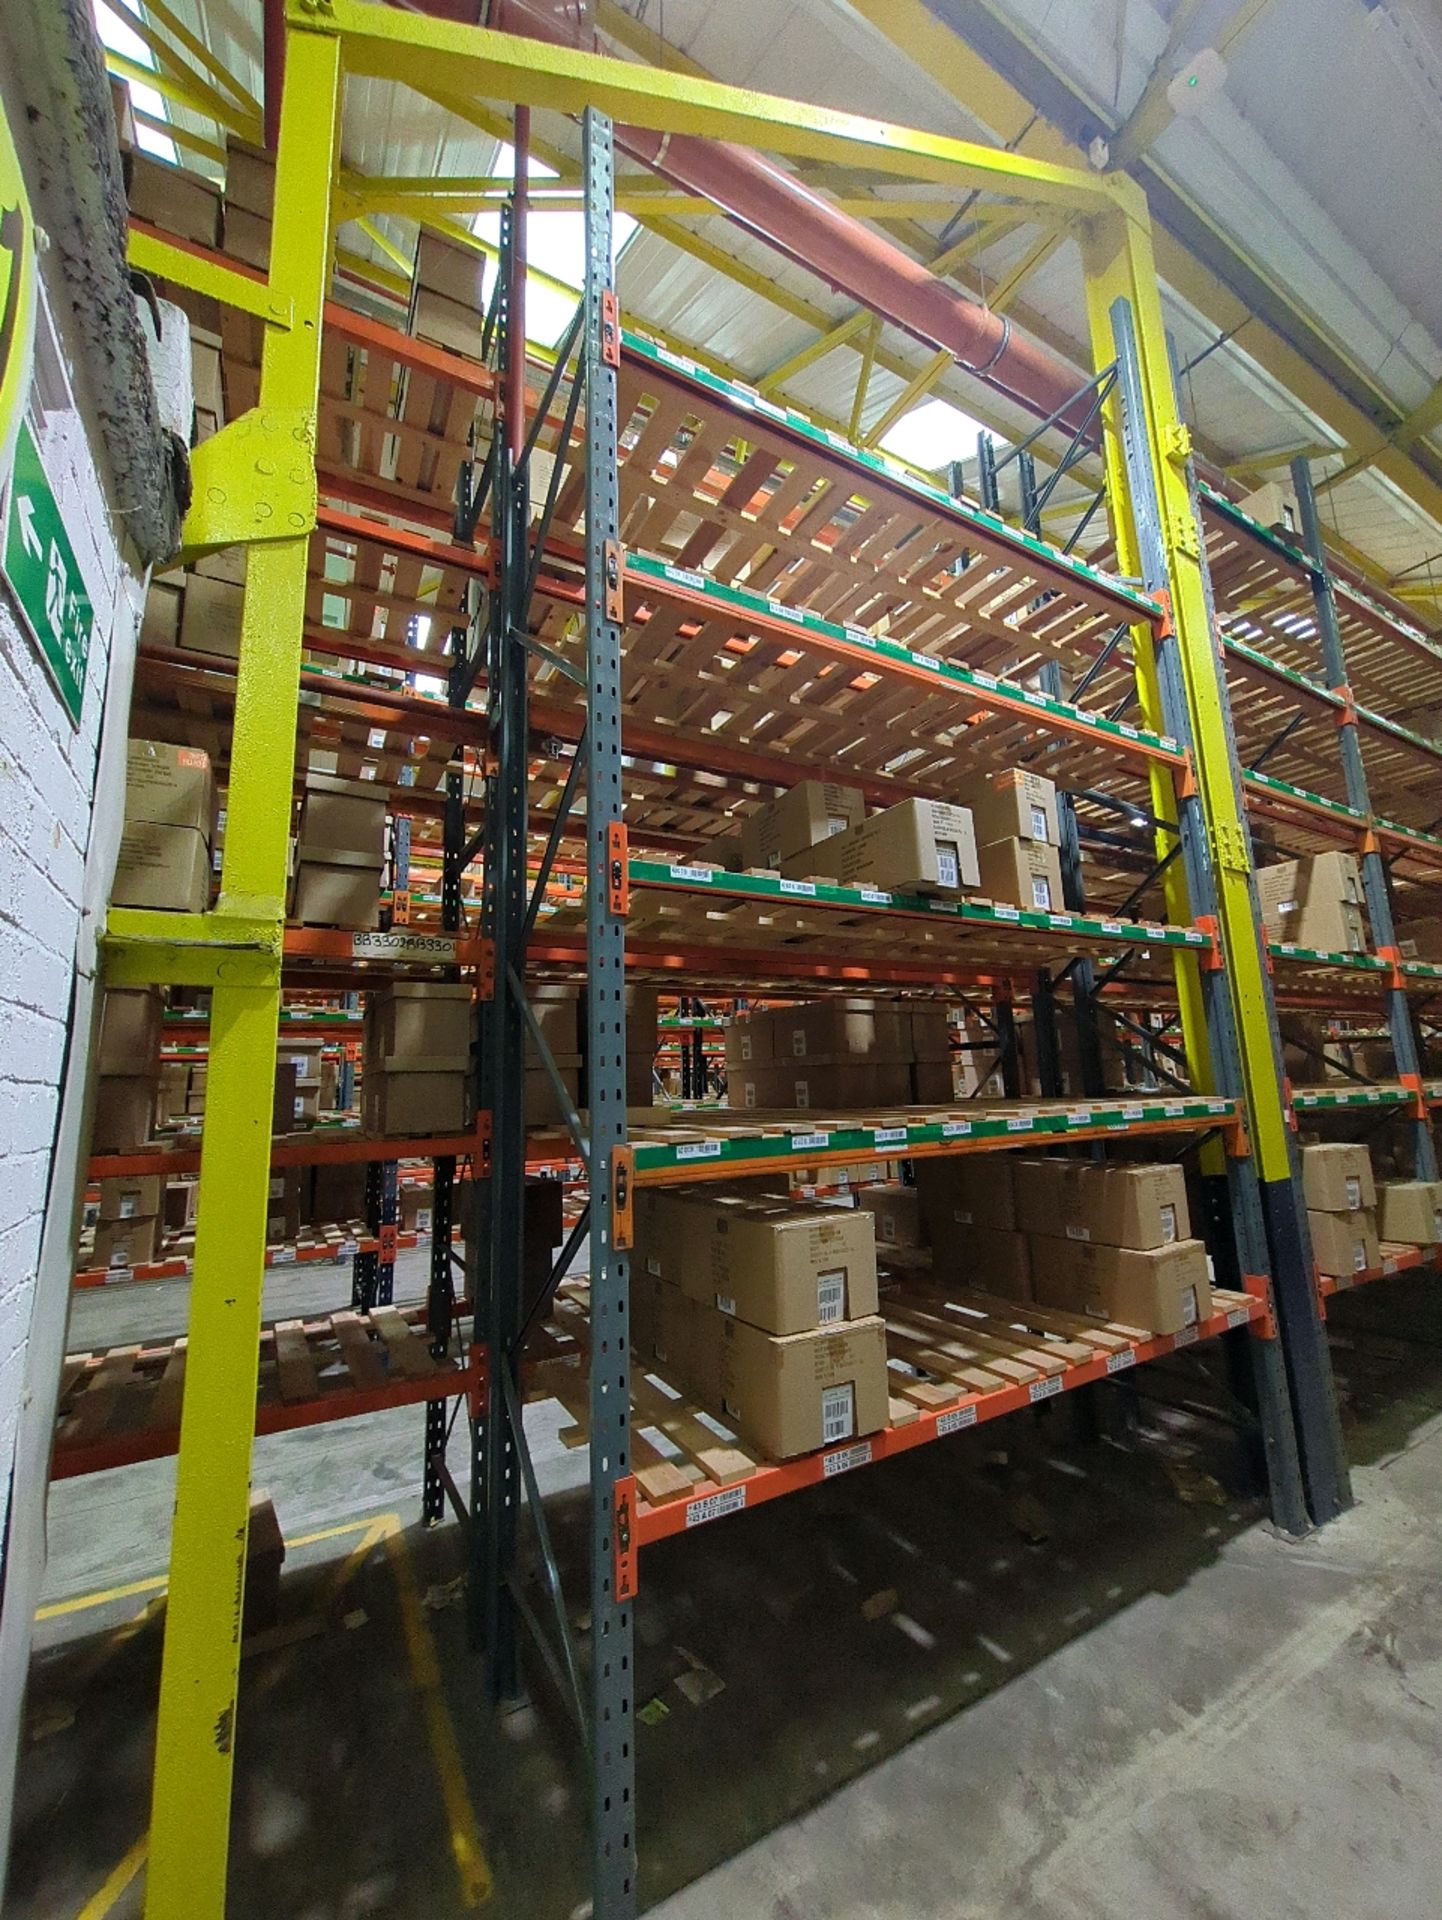 Run Of 43 Bays Of Boltless Industrial Pallet Racking - Image 16 of 21